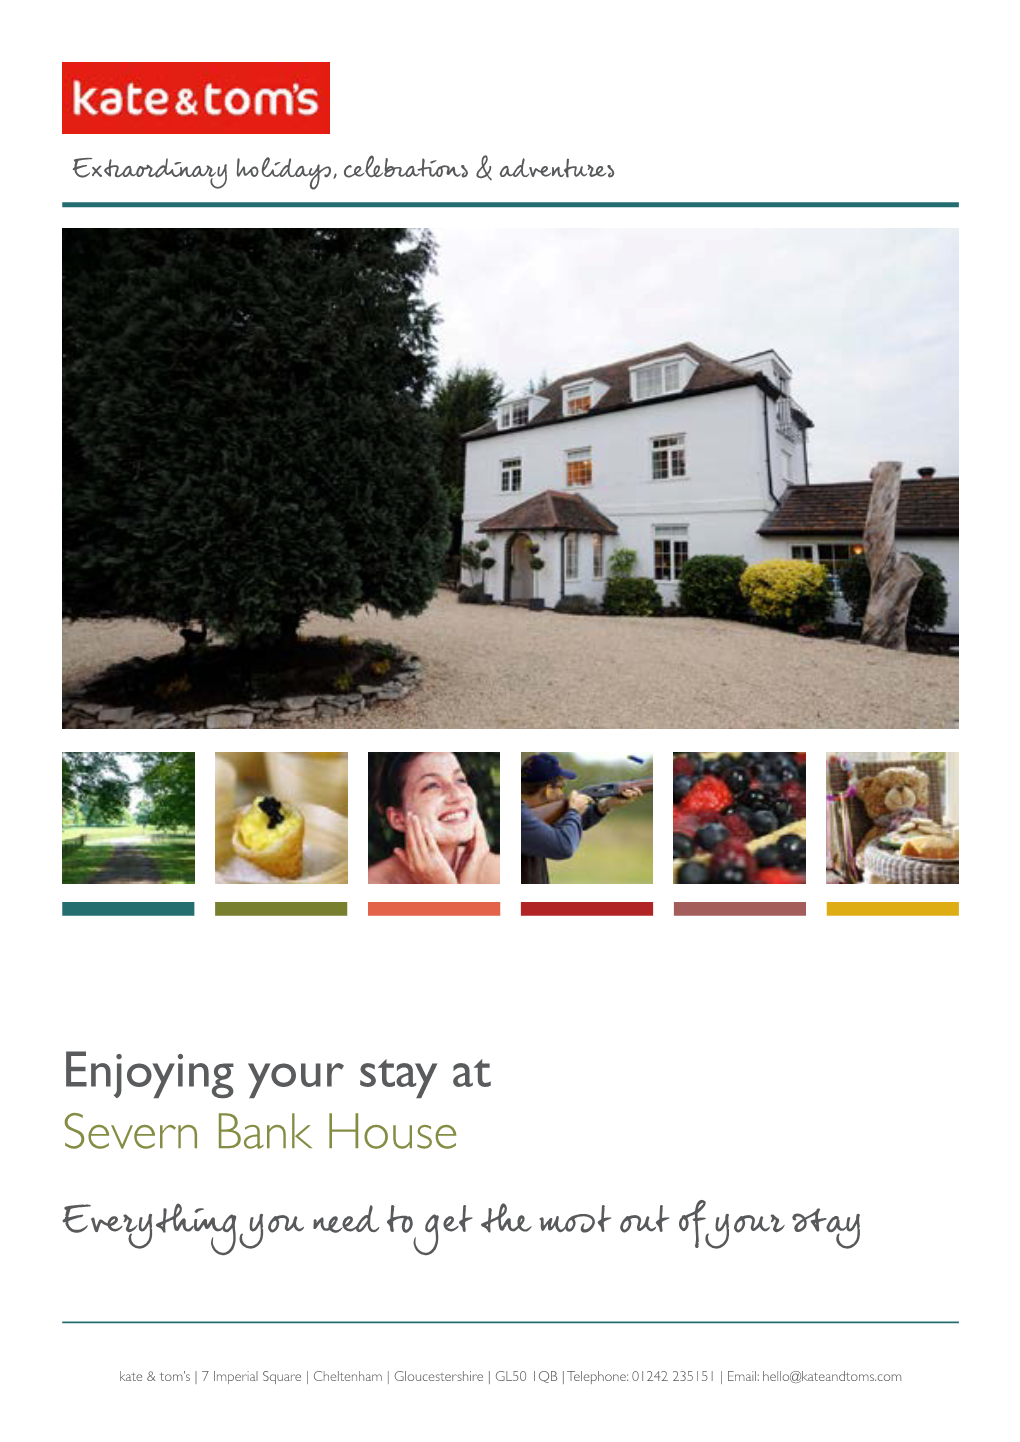 Enjoying Your Stay at Severn Bank House